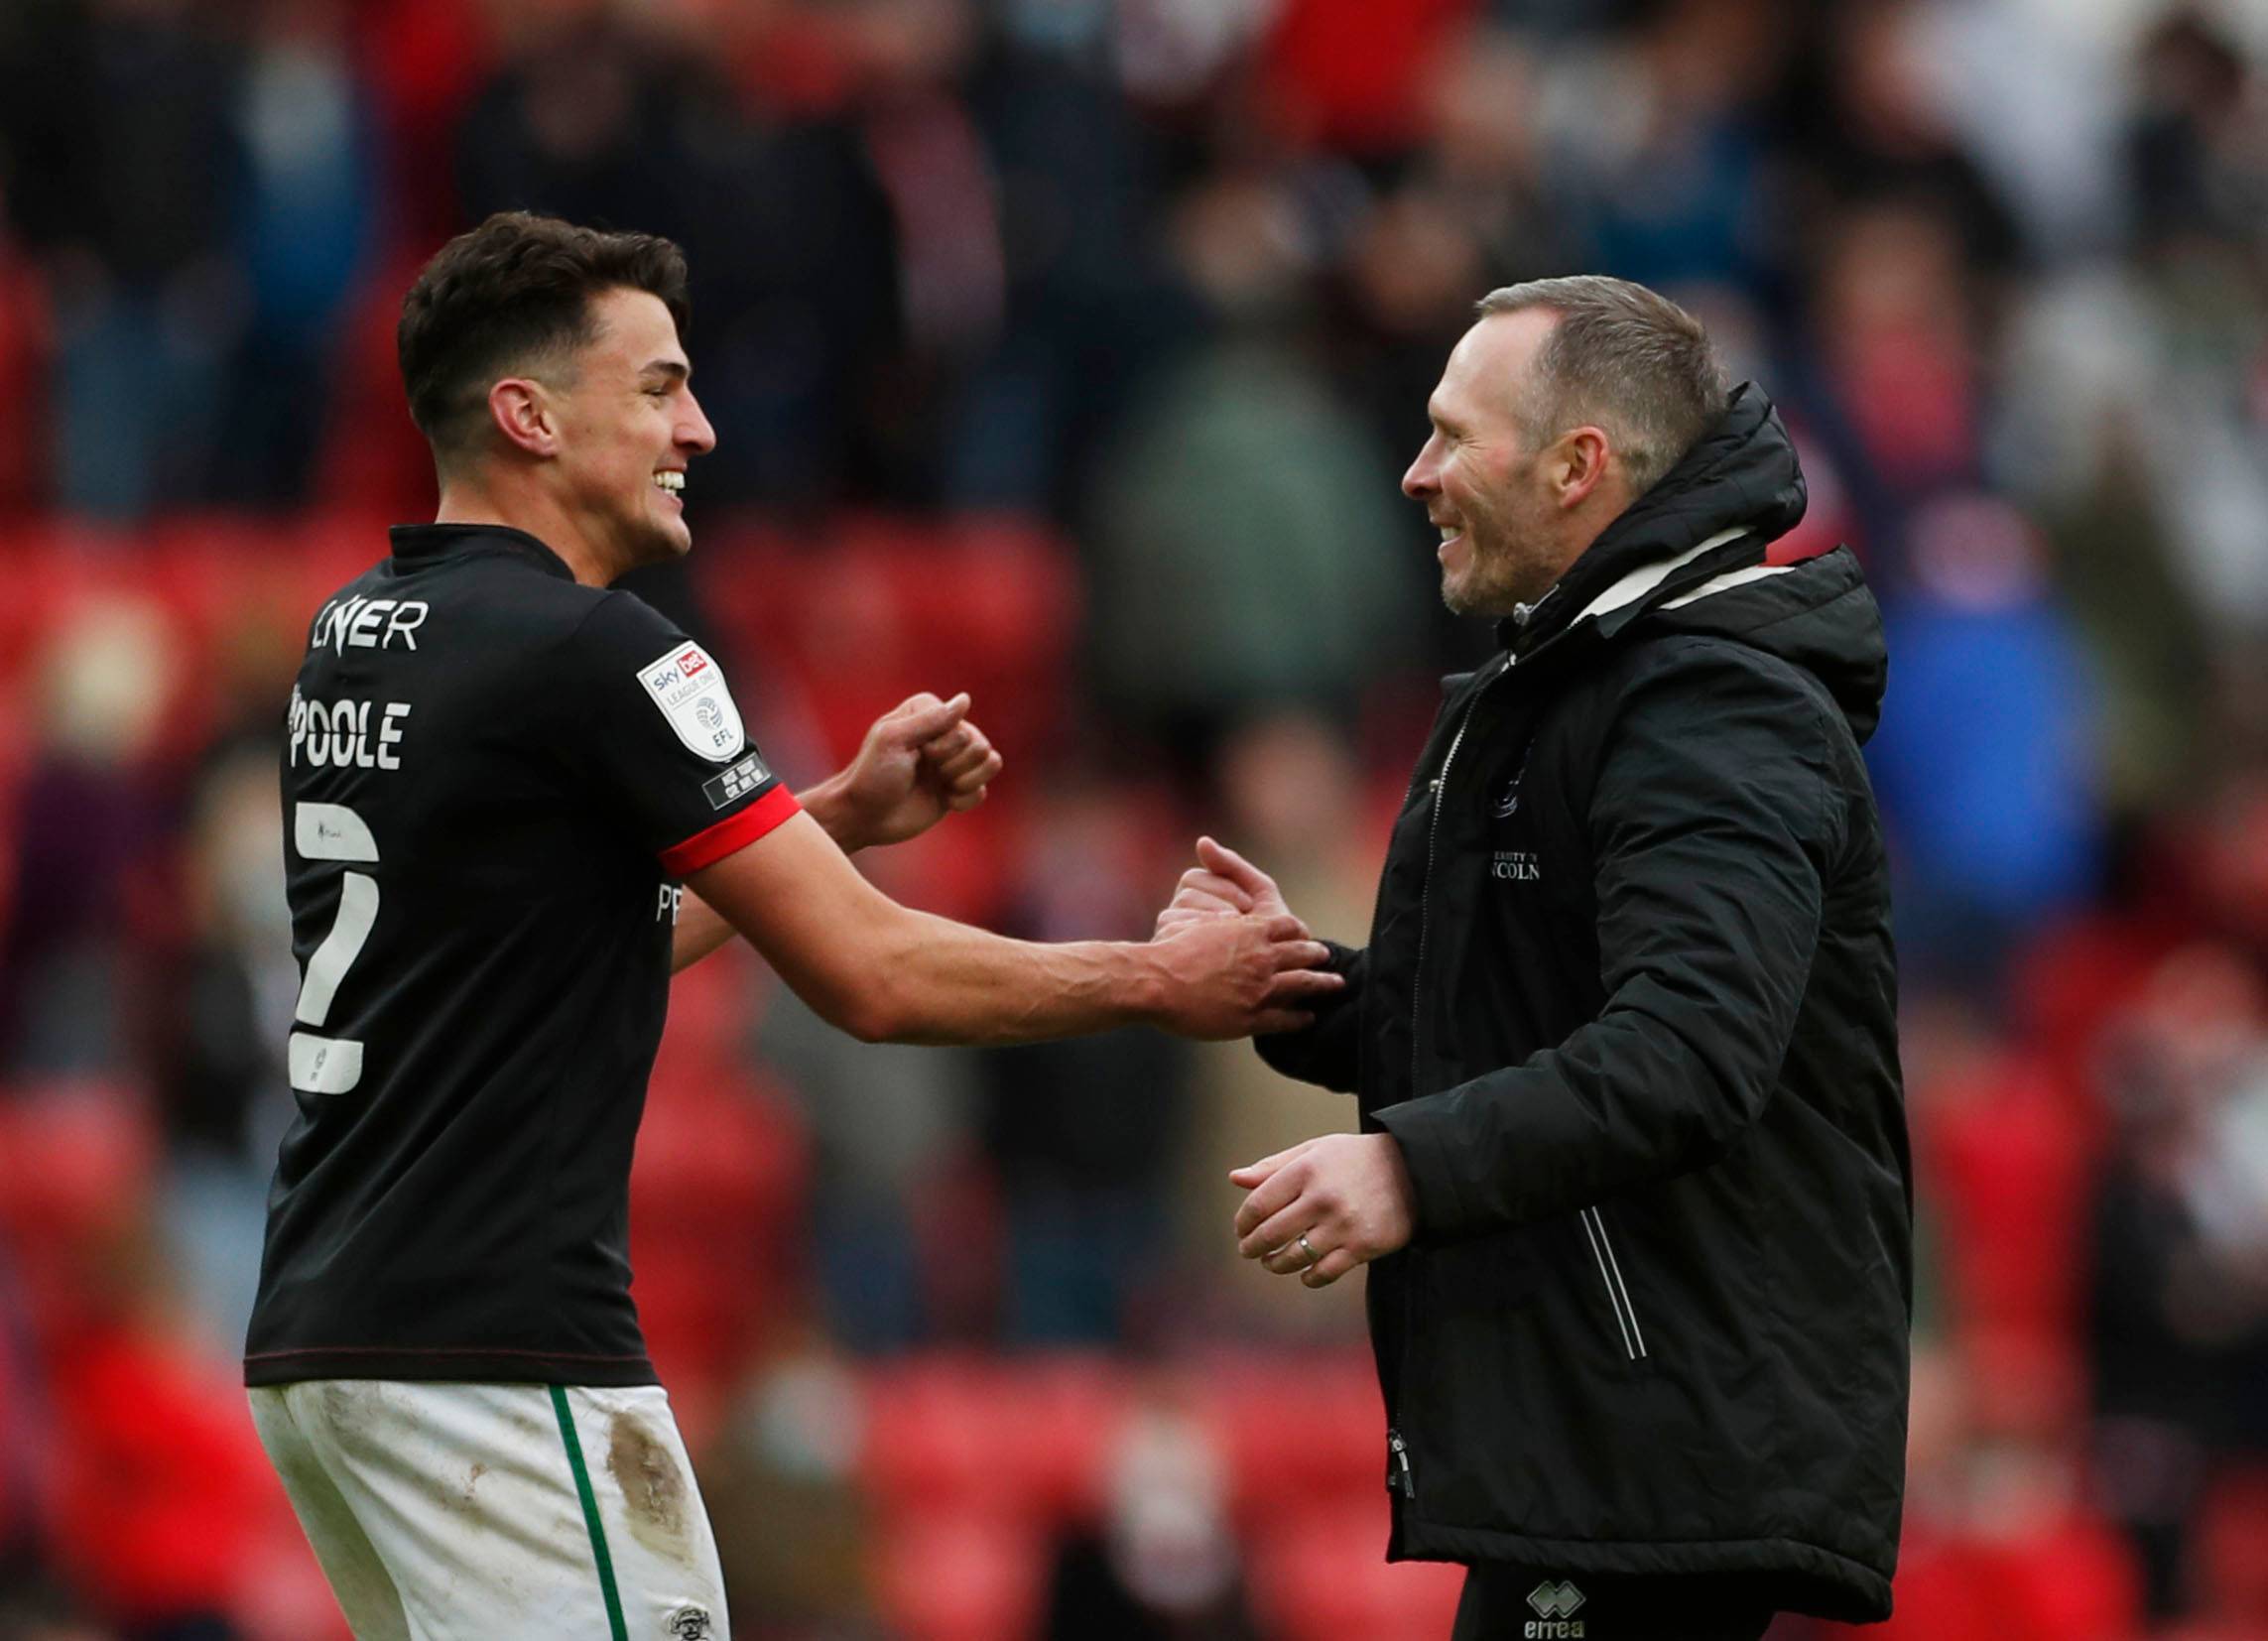 QPR: Hoops interested in deal to sign Regan Poole - Championship News